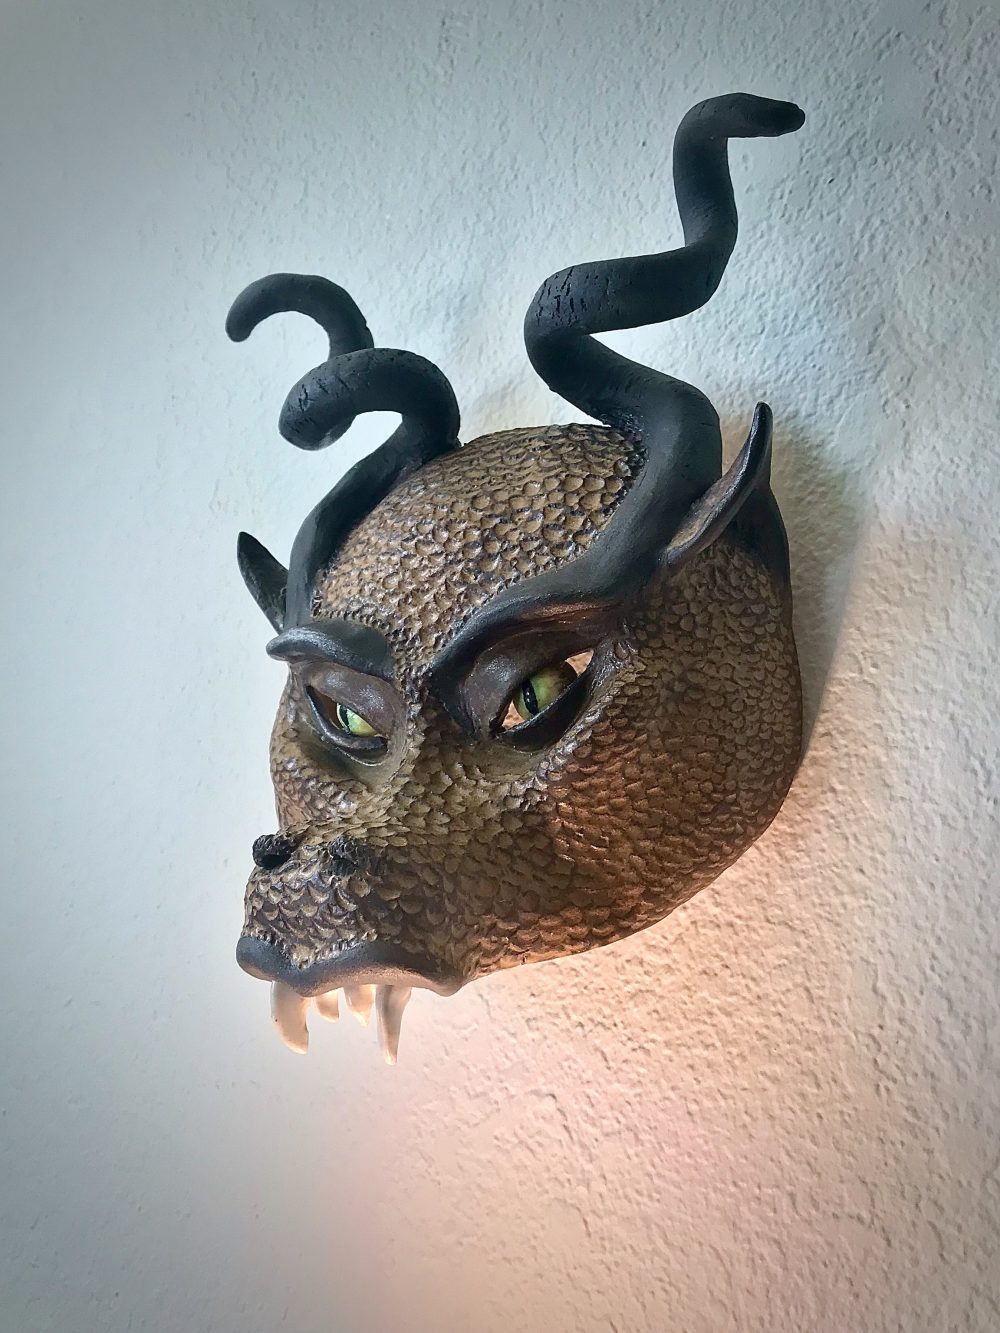 An angled view of a half-face mask that looks like a dragon with horns.